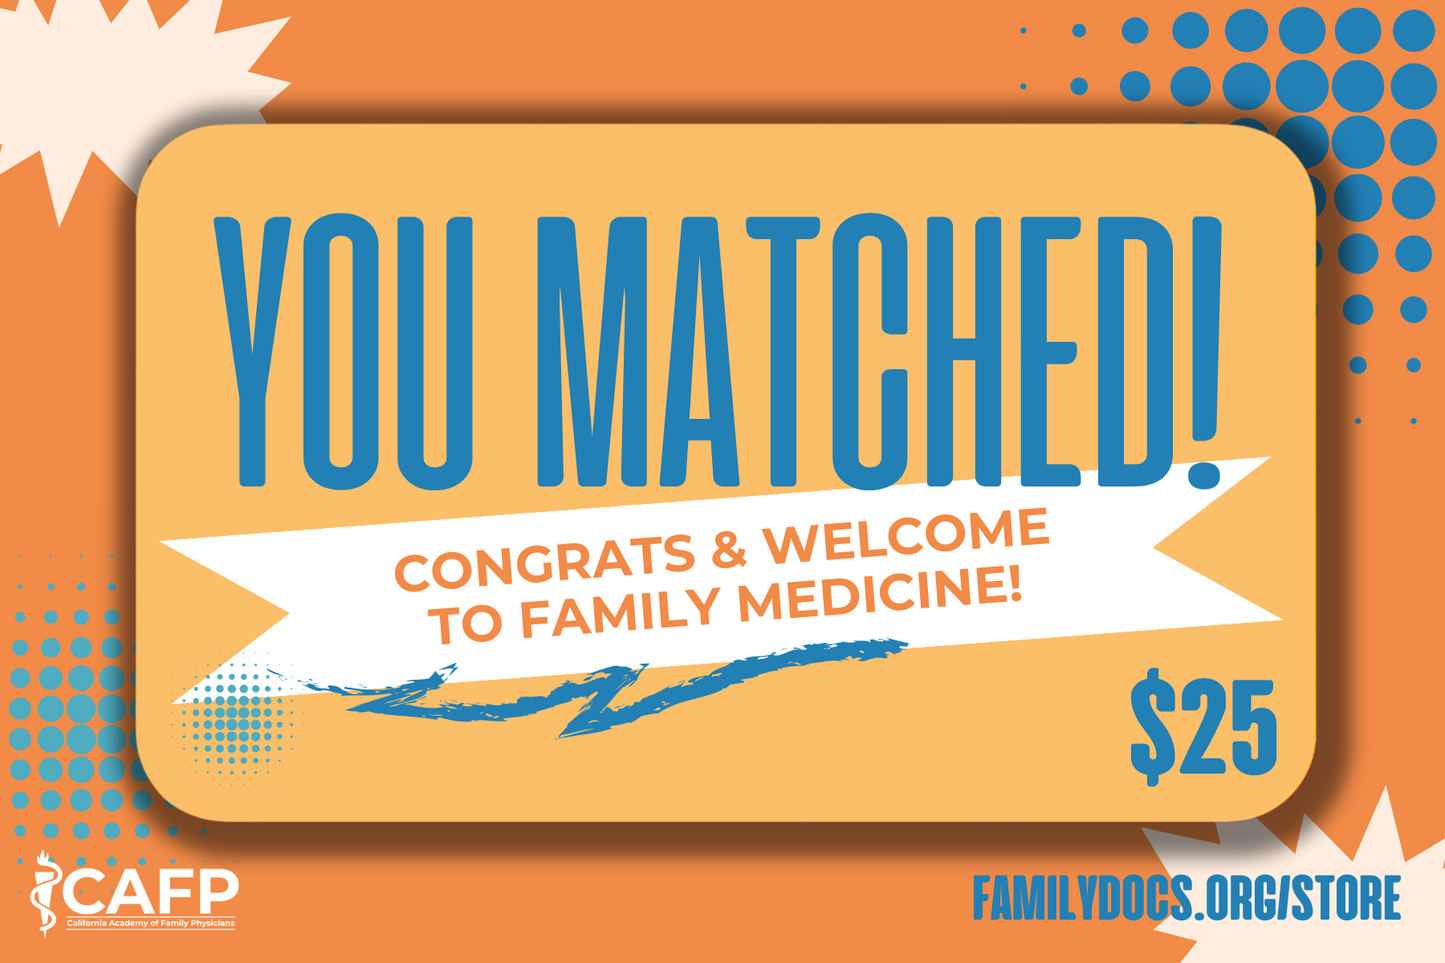 You Matched! gift card